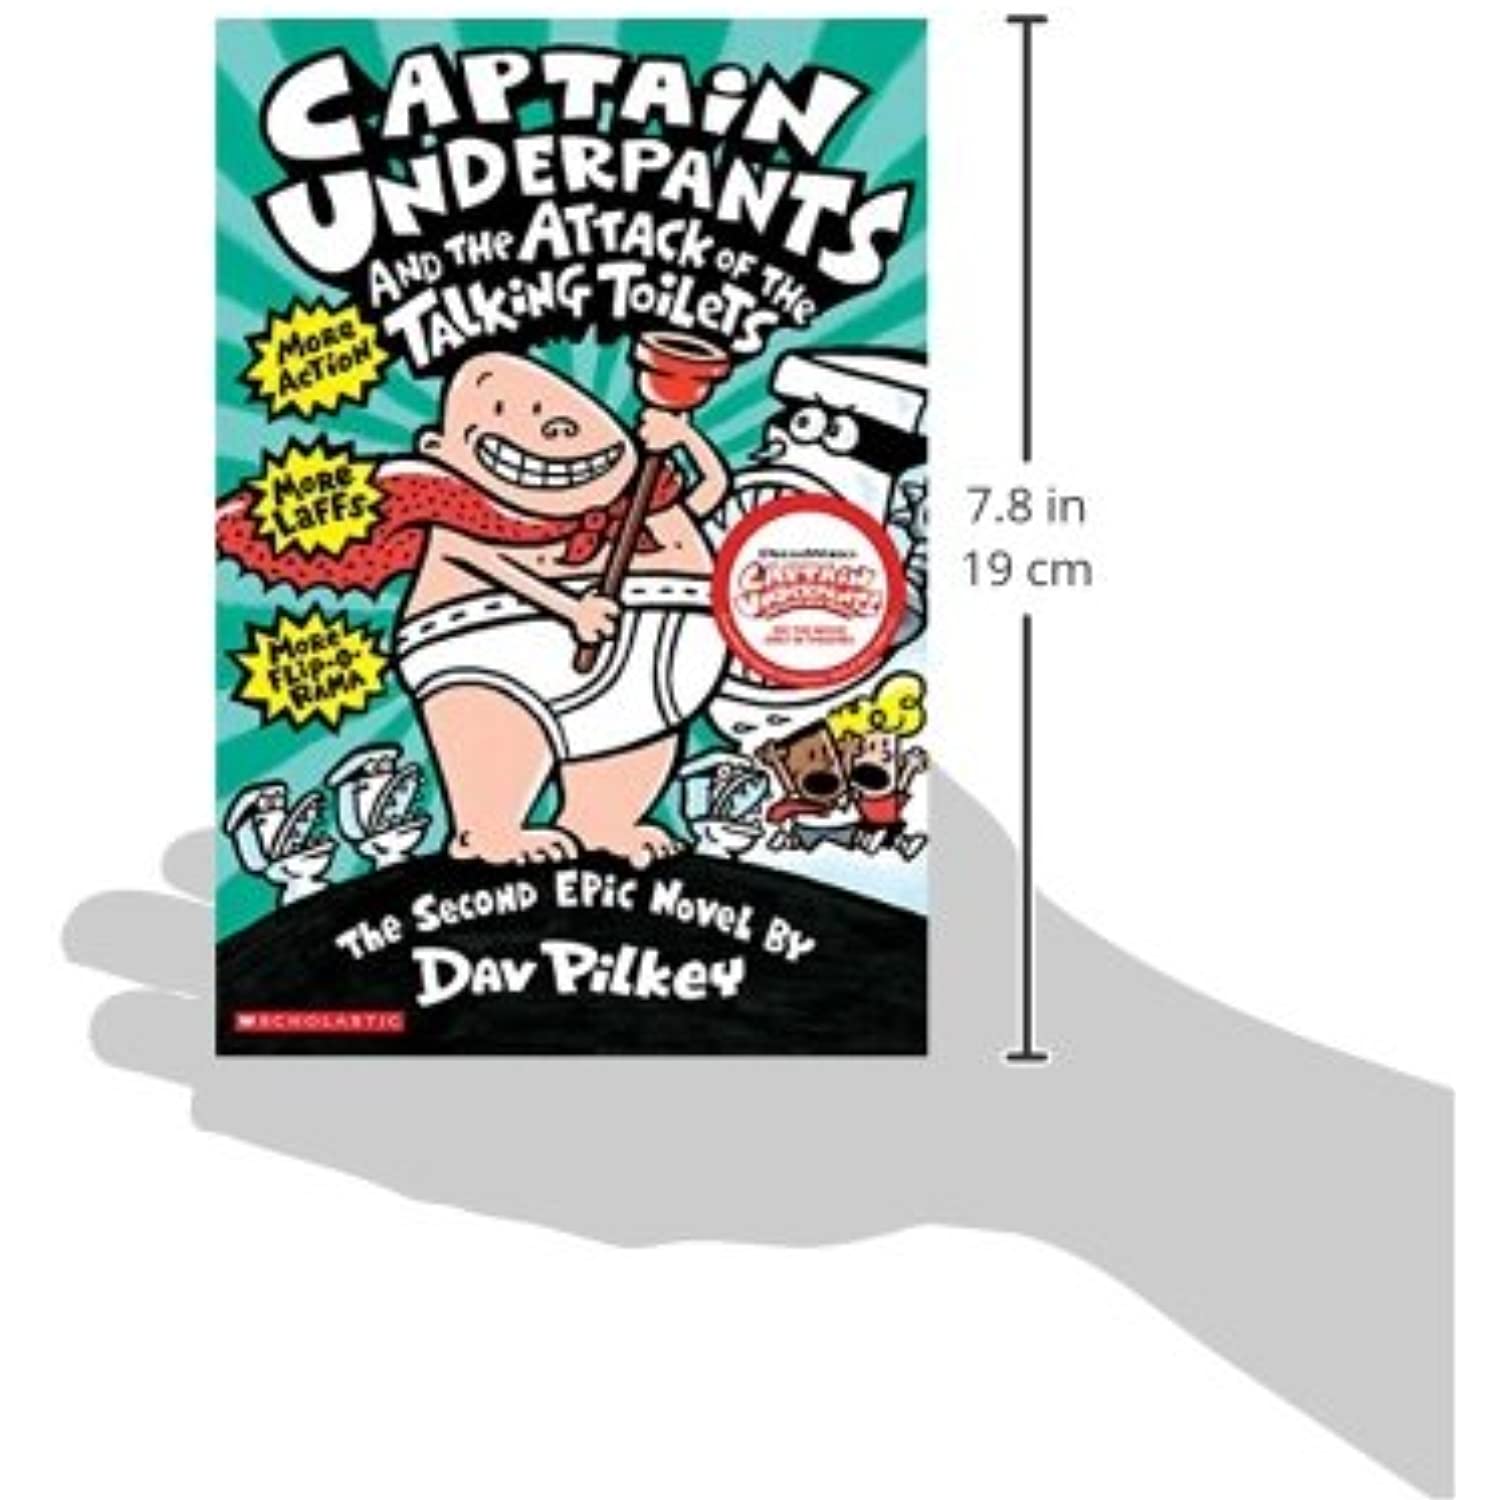 Captain Underpants and the Attack of the Talking Toilets (Captain Underpants #2) (Paperback) - image 3 of 3